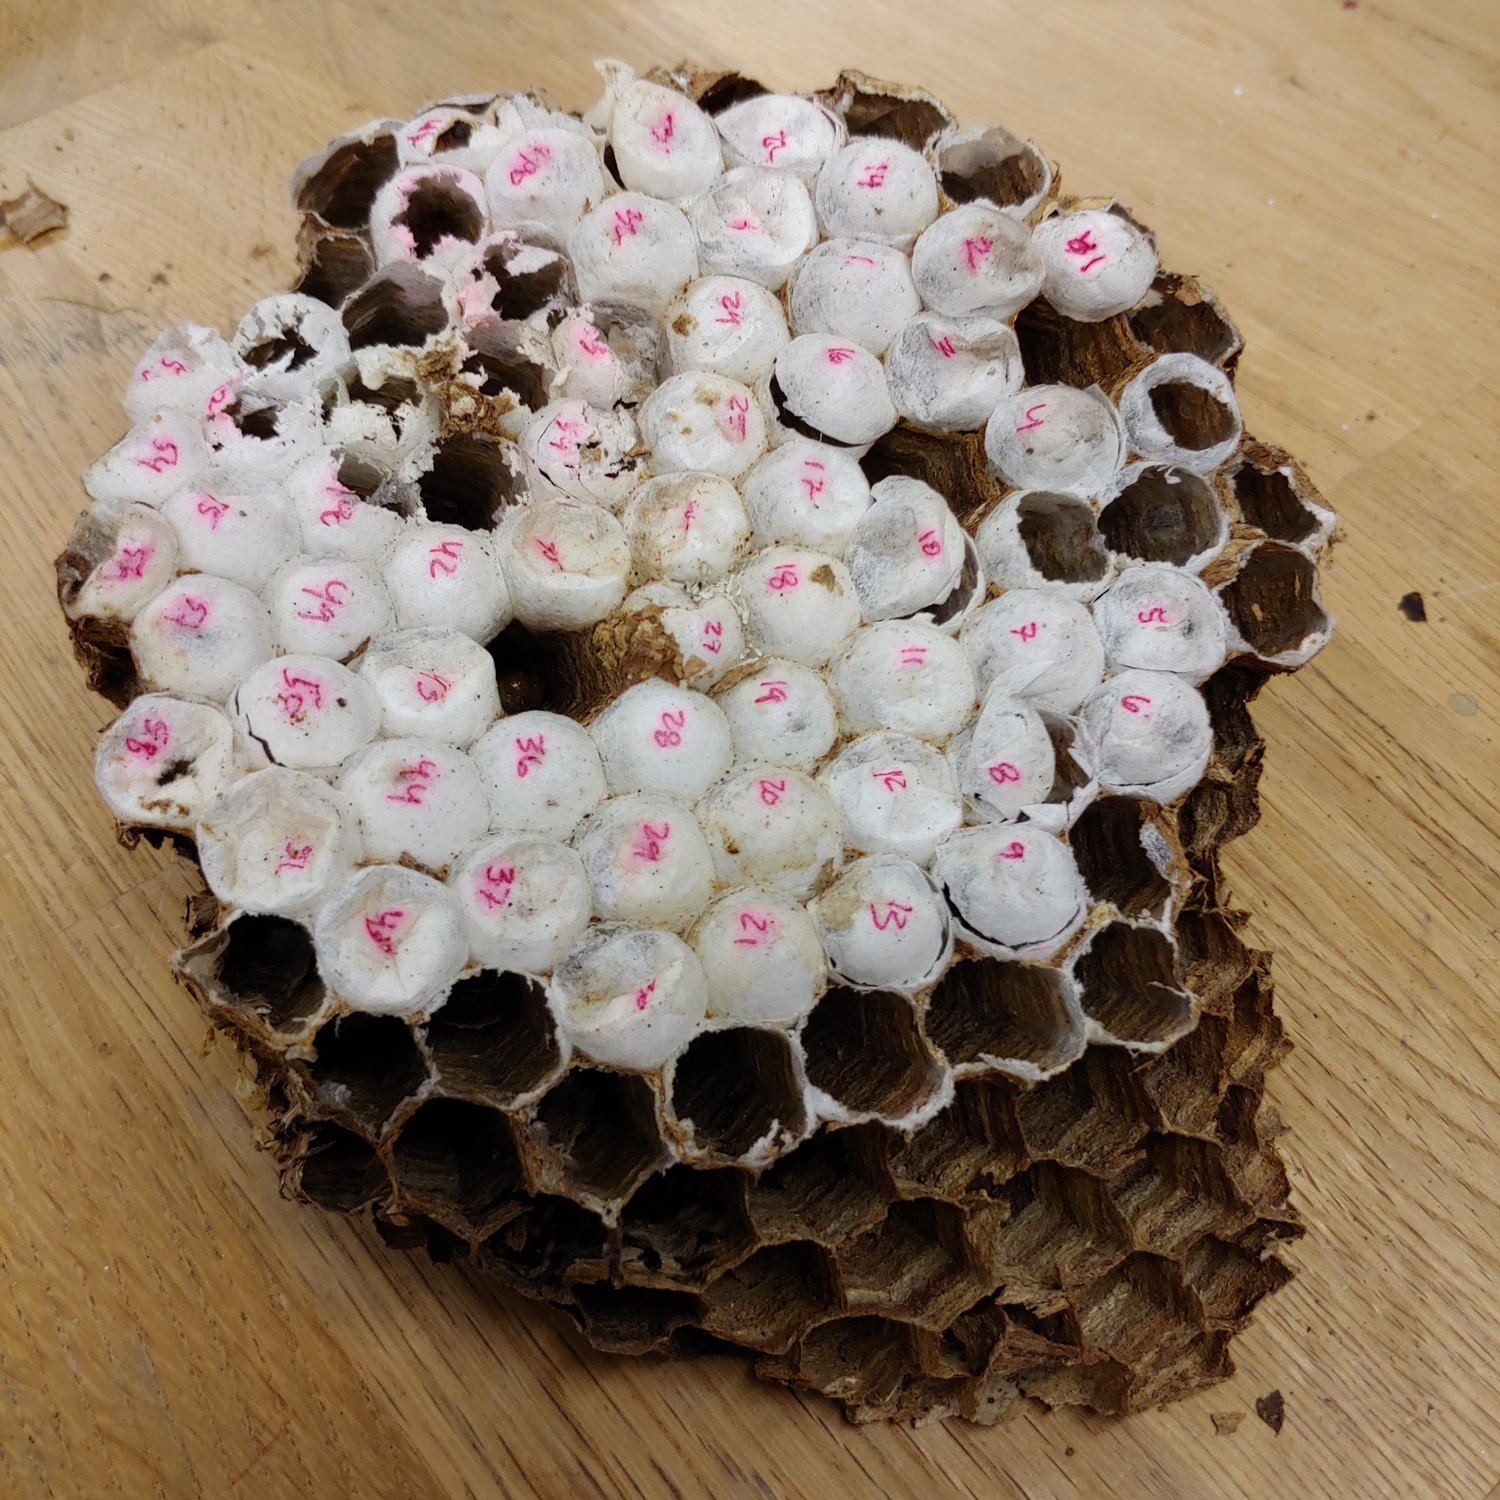 One of the six combs in the first Asian giant hornet nest found in the U.S. The nest will go to the Lynden fair before being displayed in the Smithsonian National Museum of Natural History.